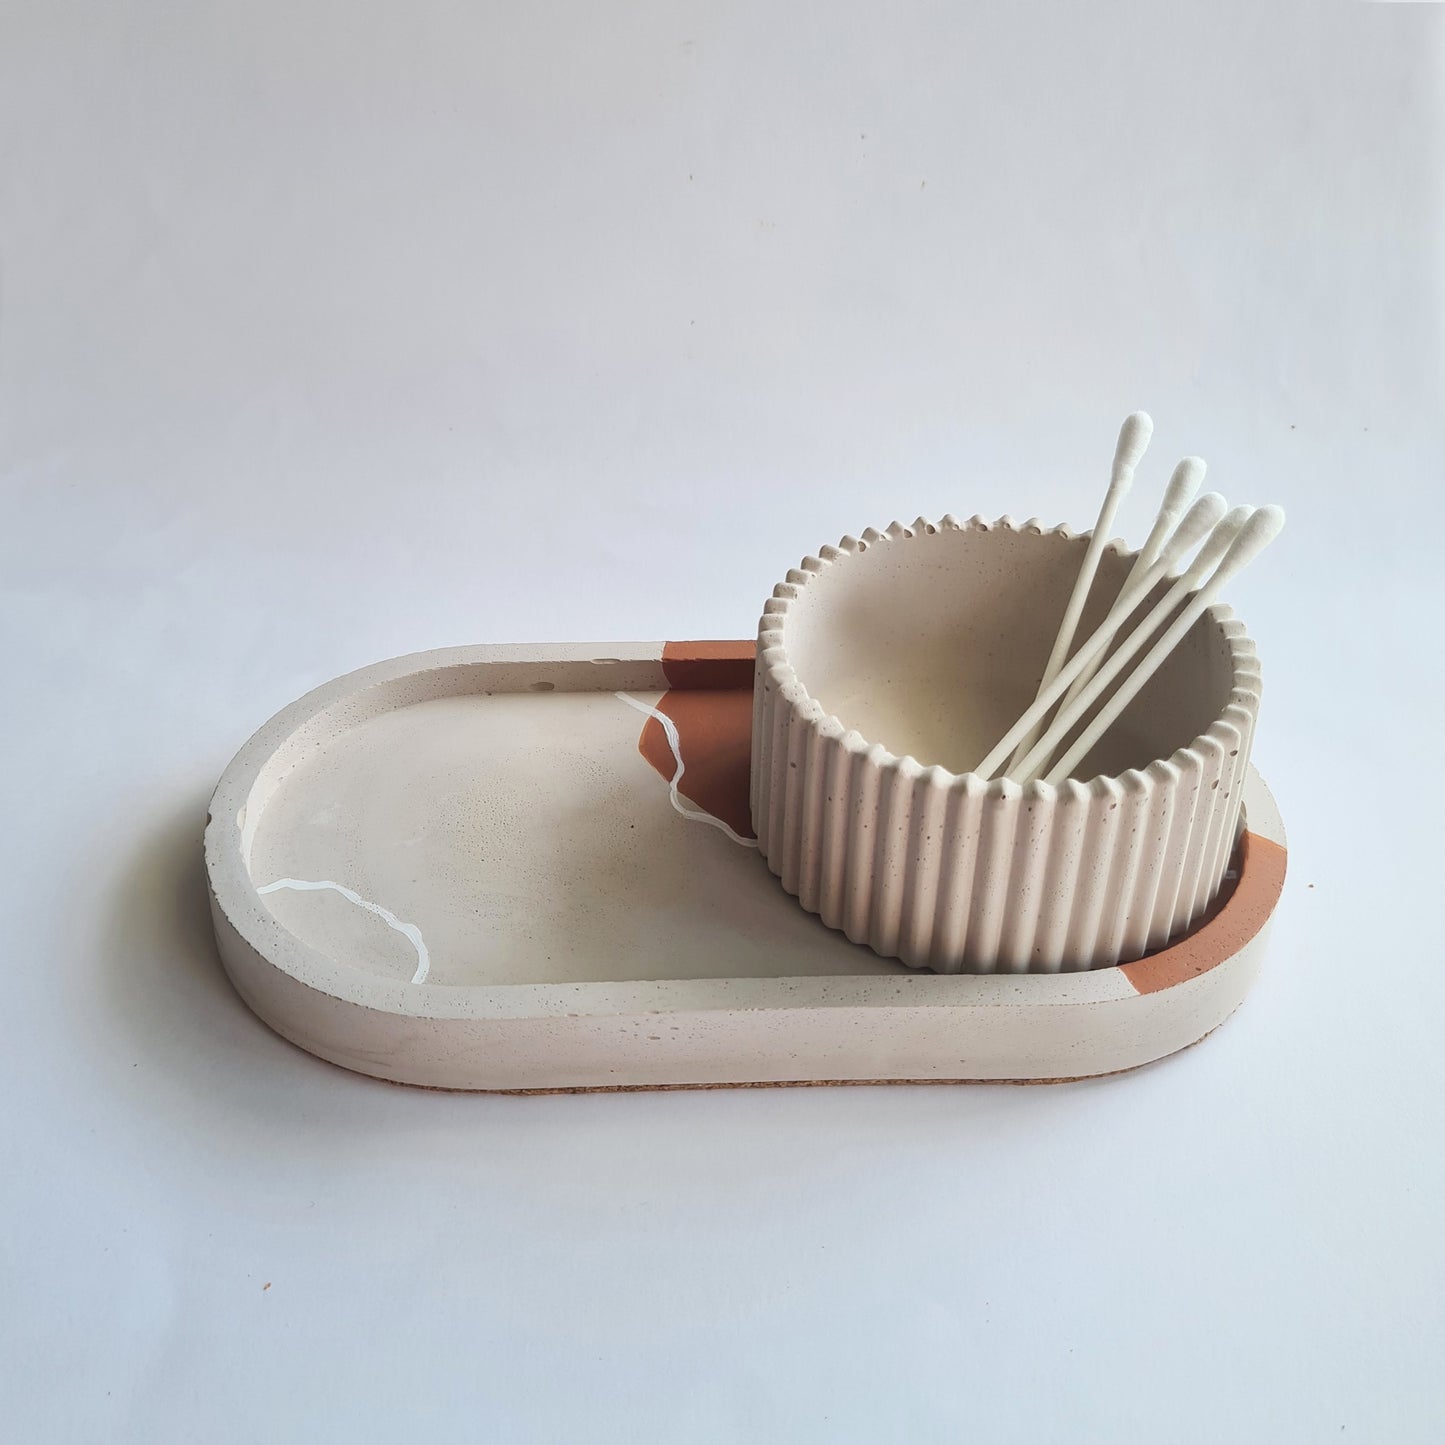 Abstract Terracotta Oval Tray